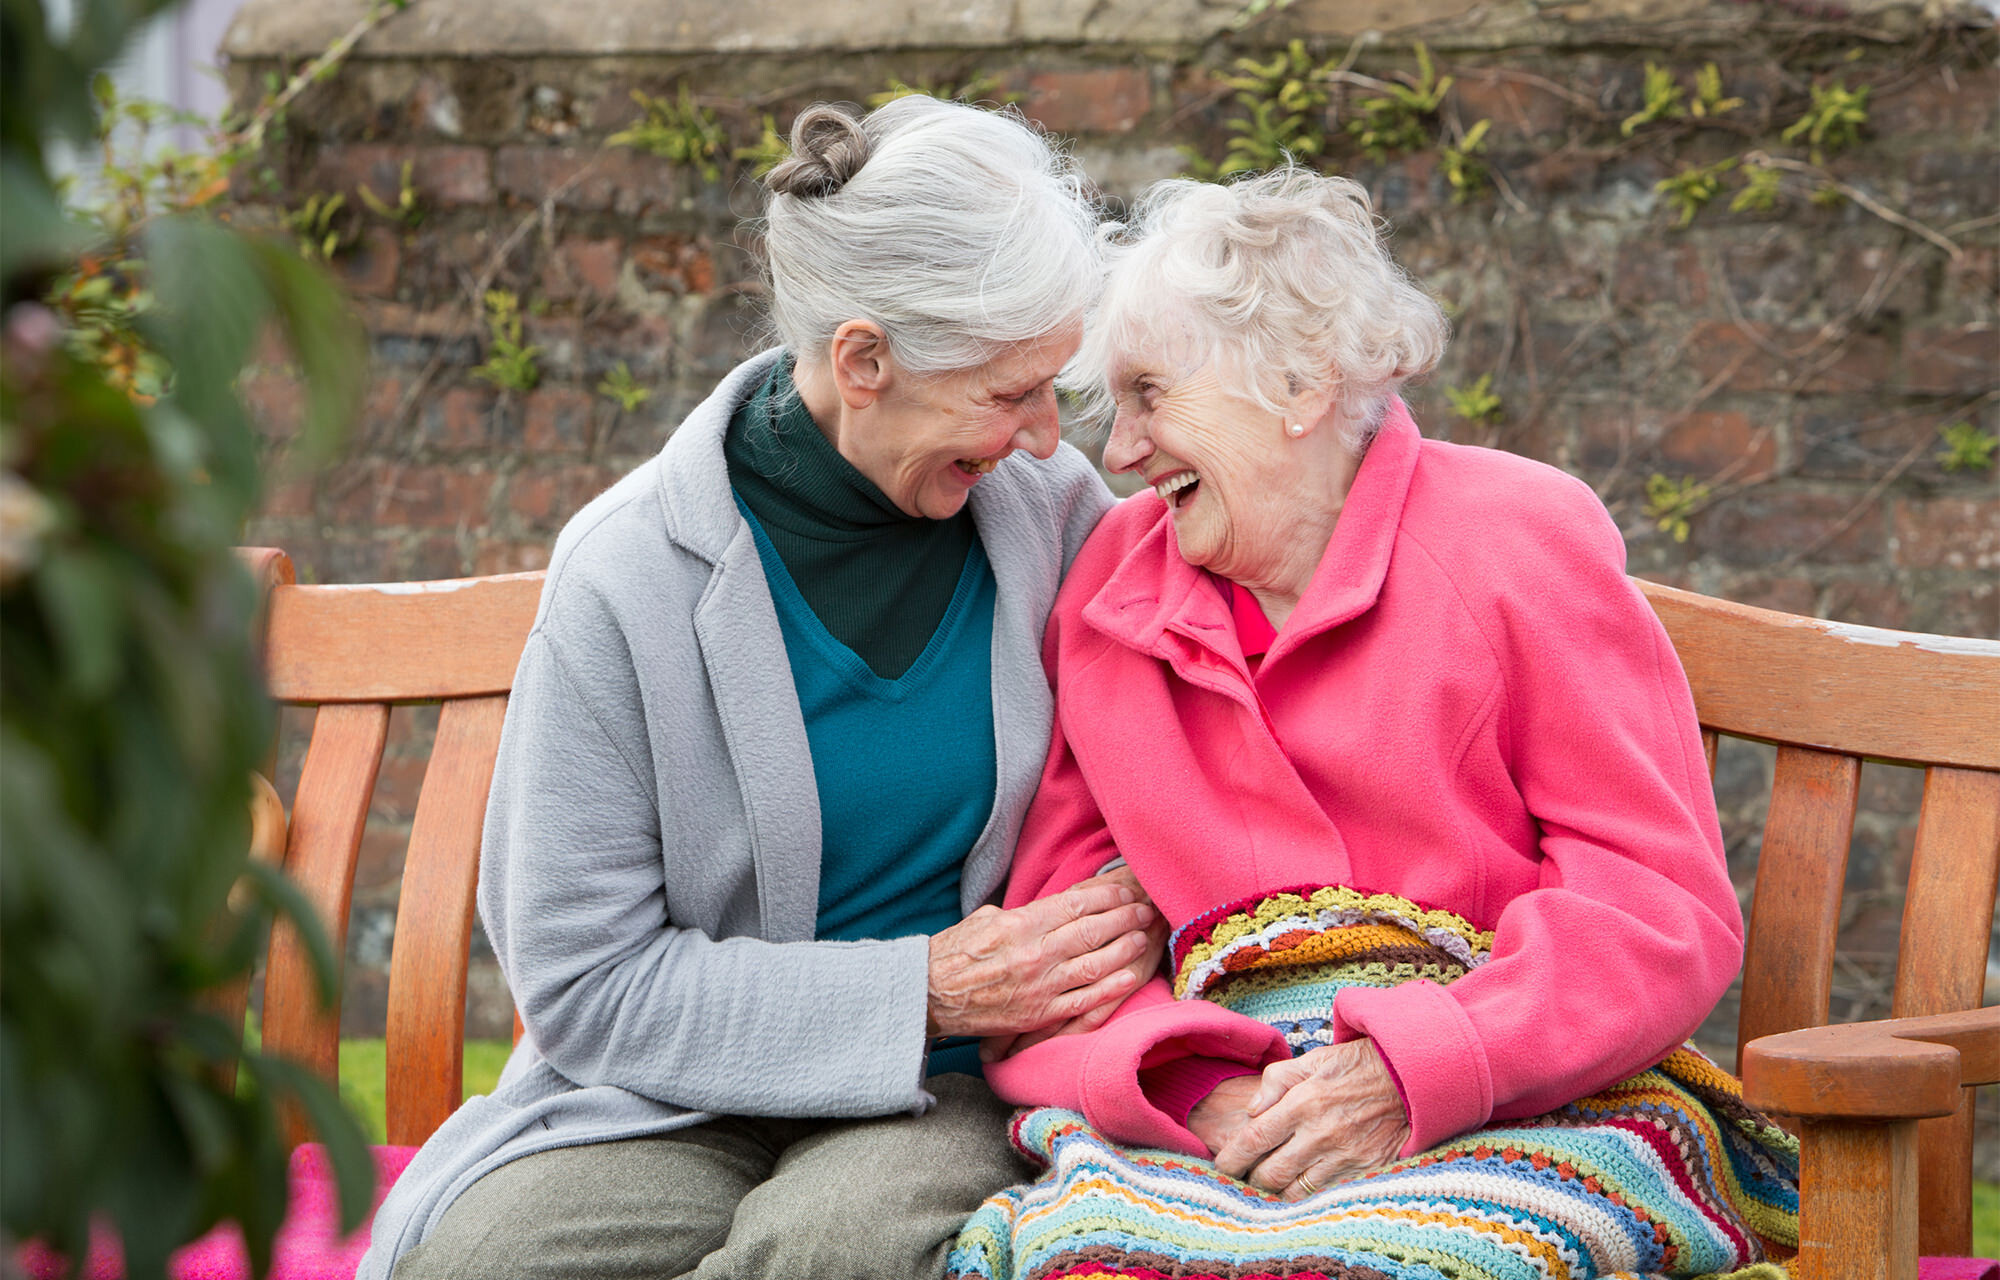 Two elderly women chatting on a bench